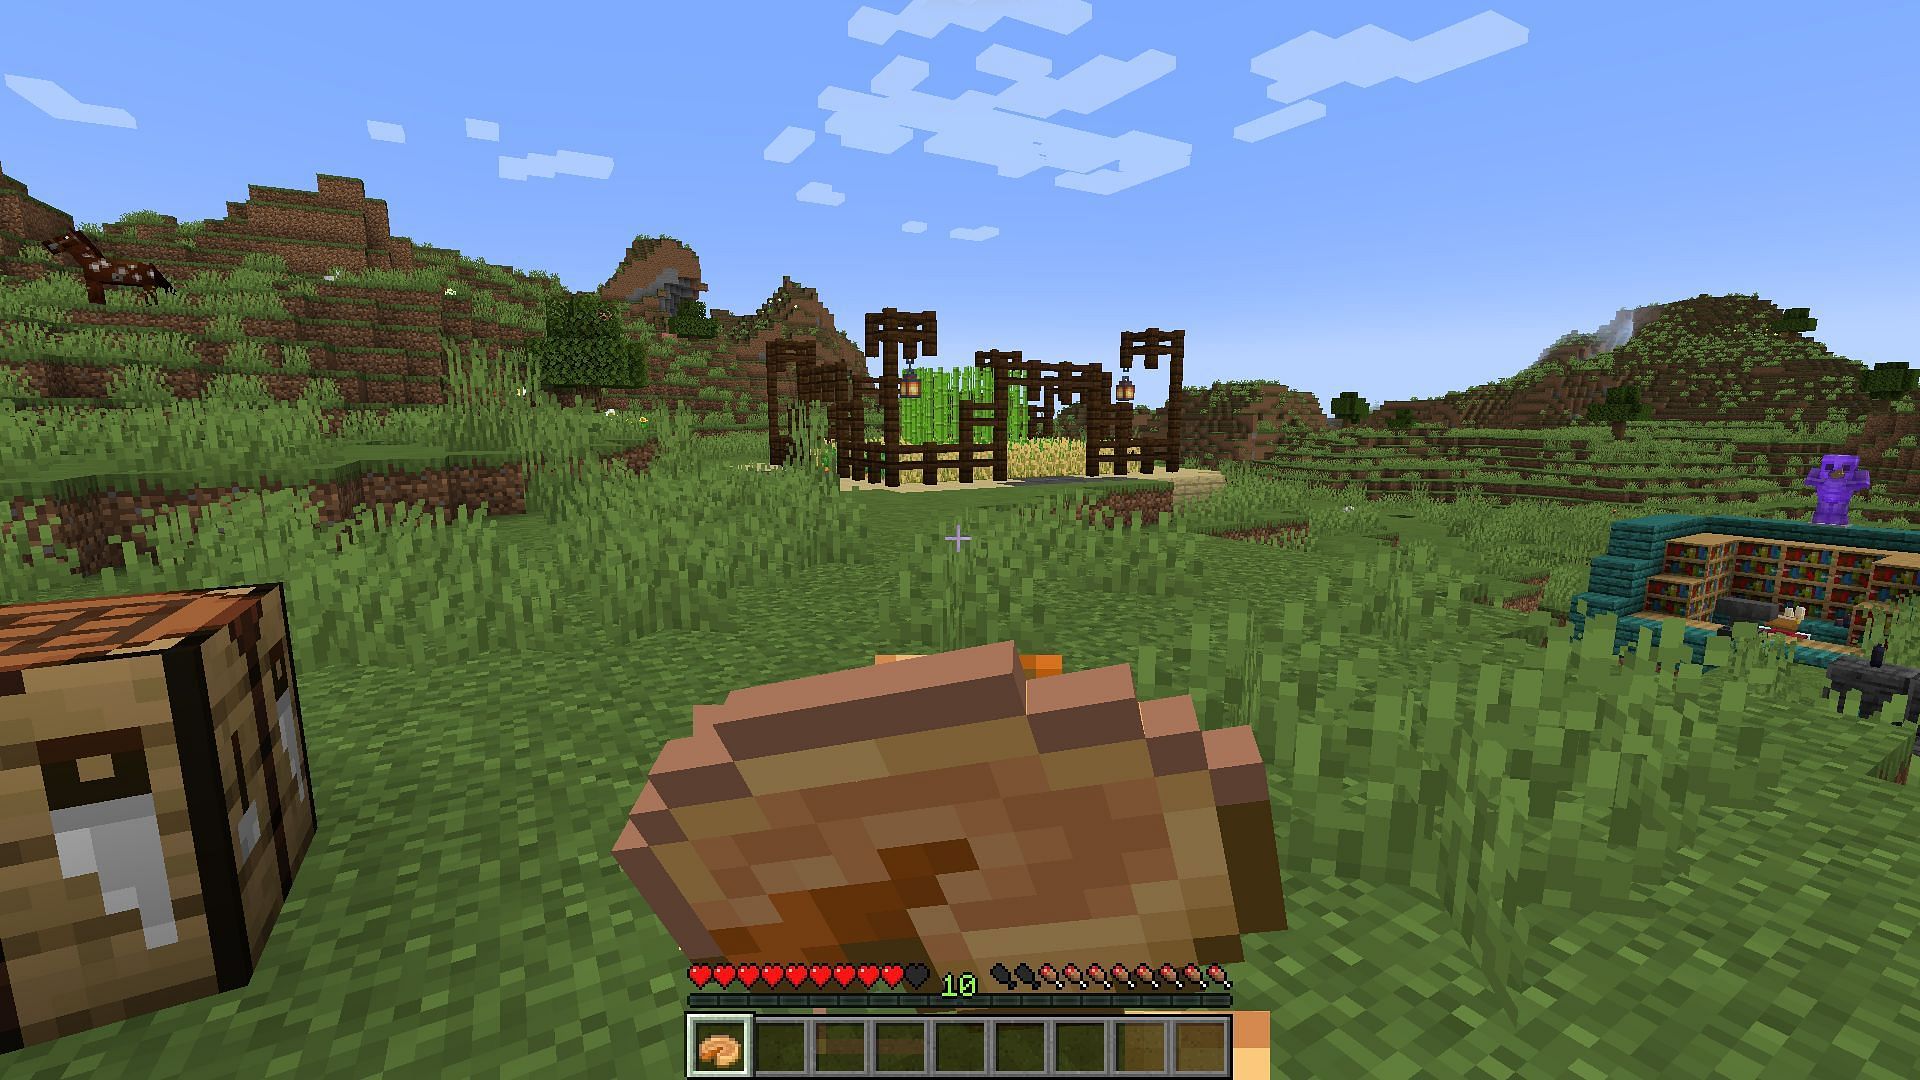 A player eating a pumpkin pie to fill their hunger (Image via Minecraft)